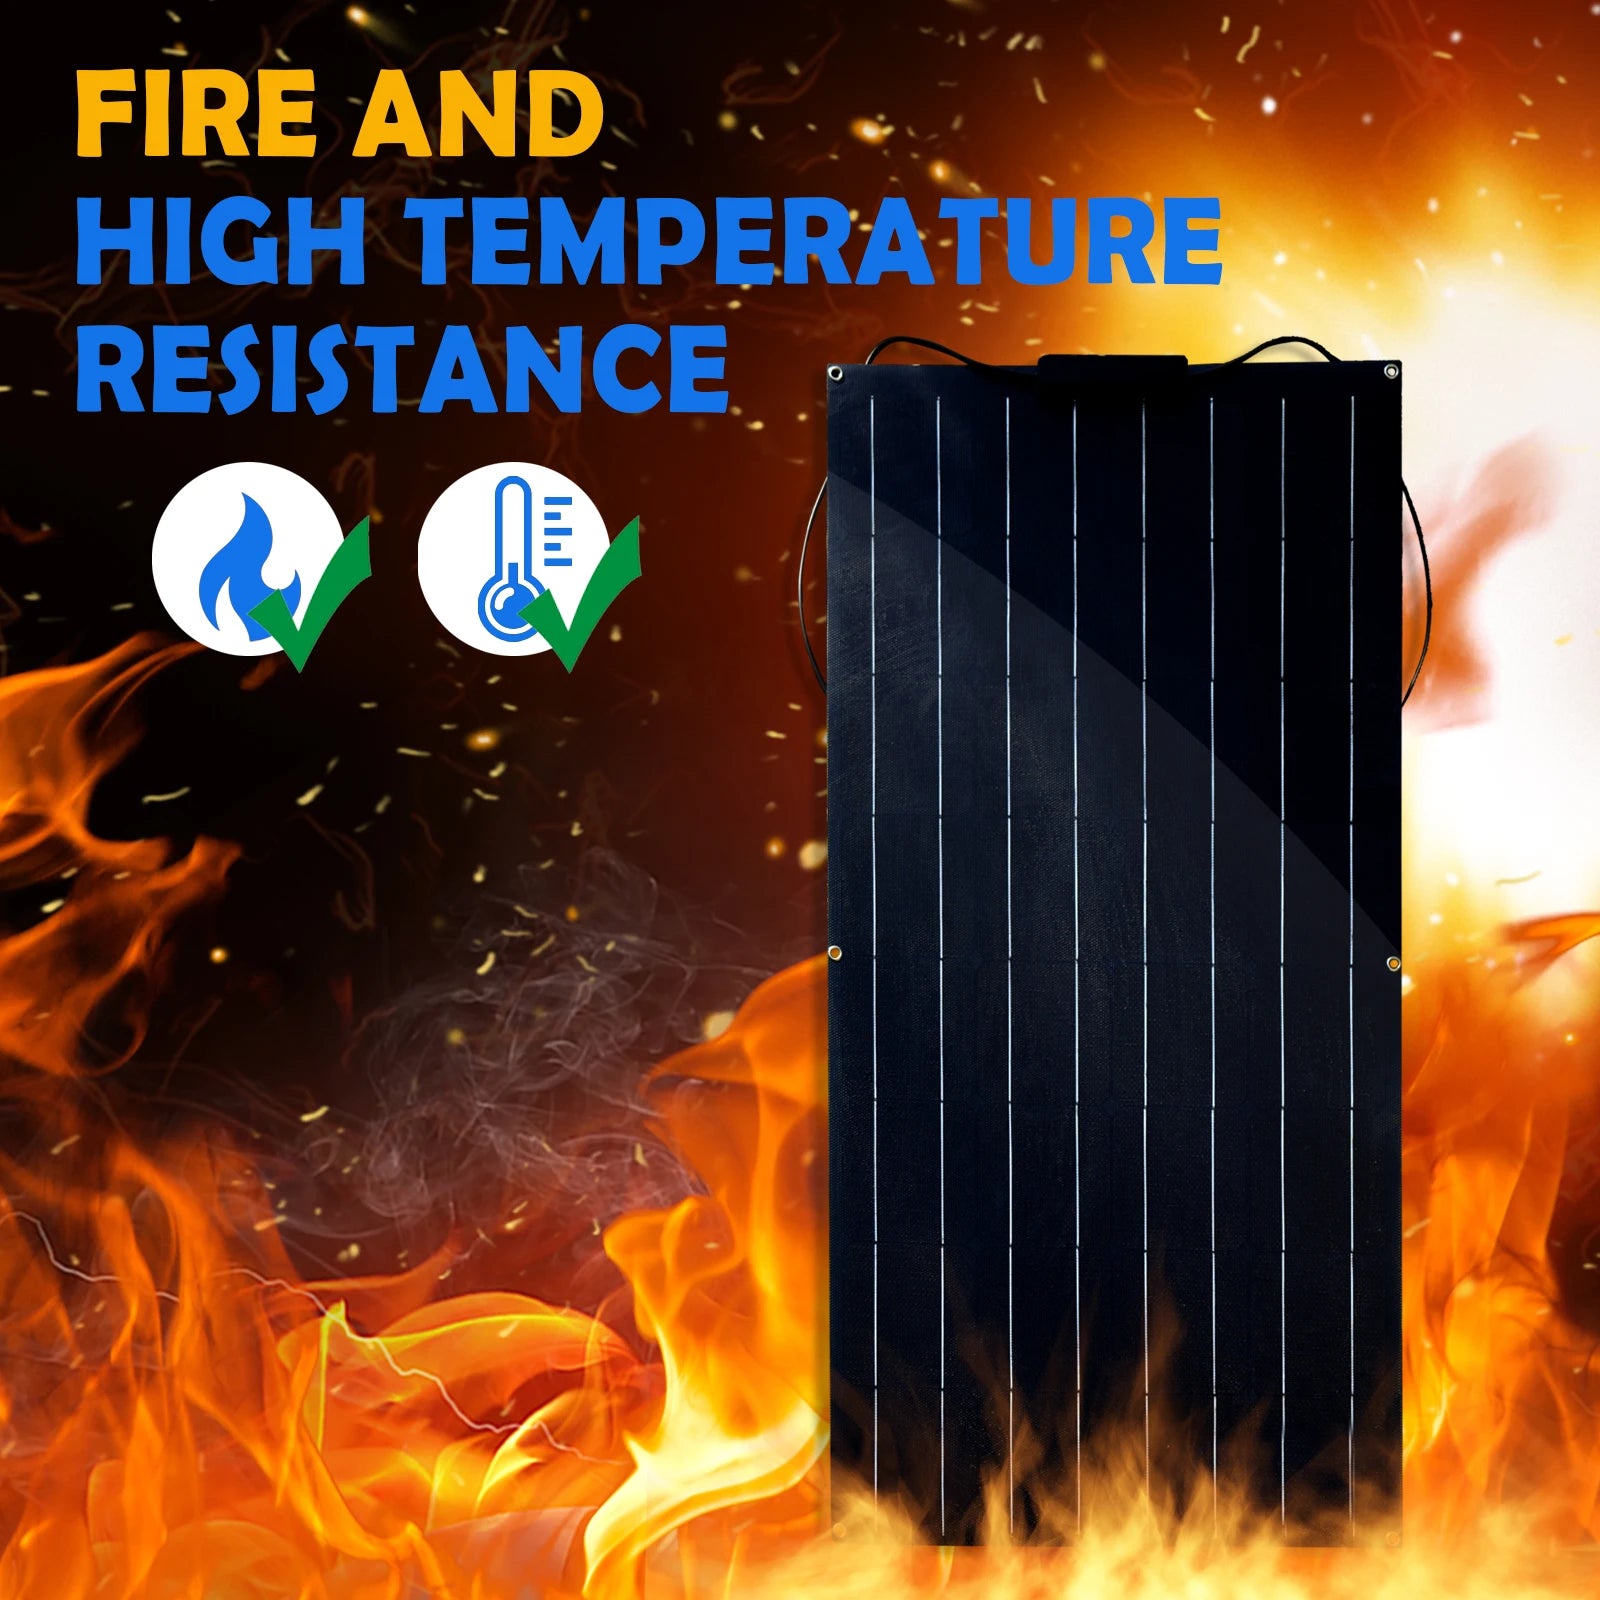 Jingyang Solar Panel, Fire-resistant and high-temperature resistant for safe and reliable operation.